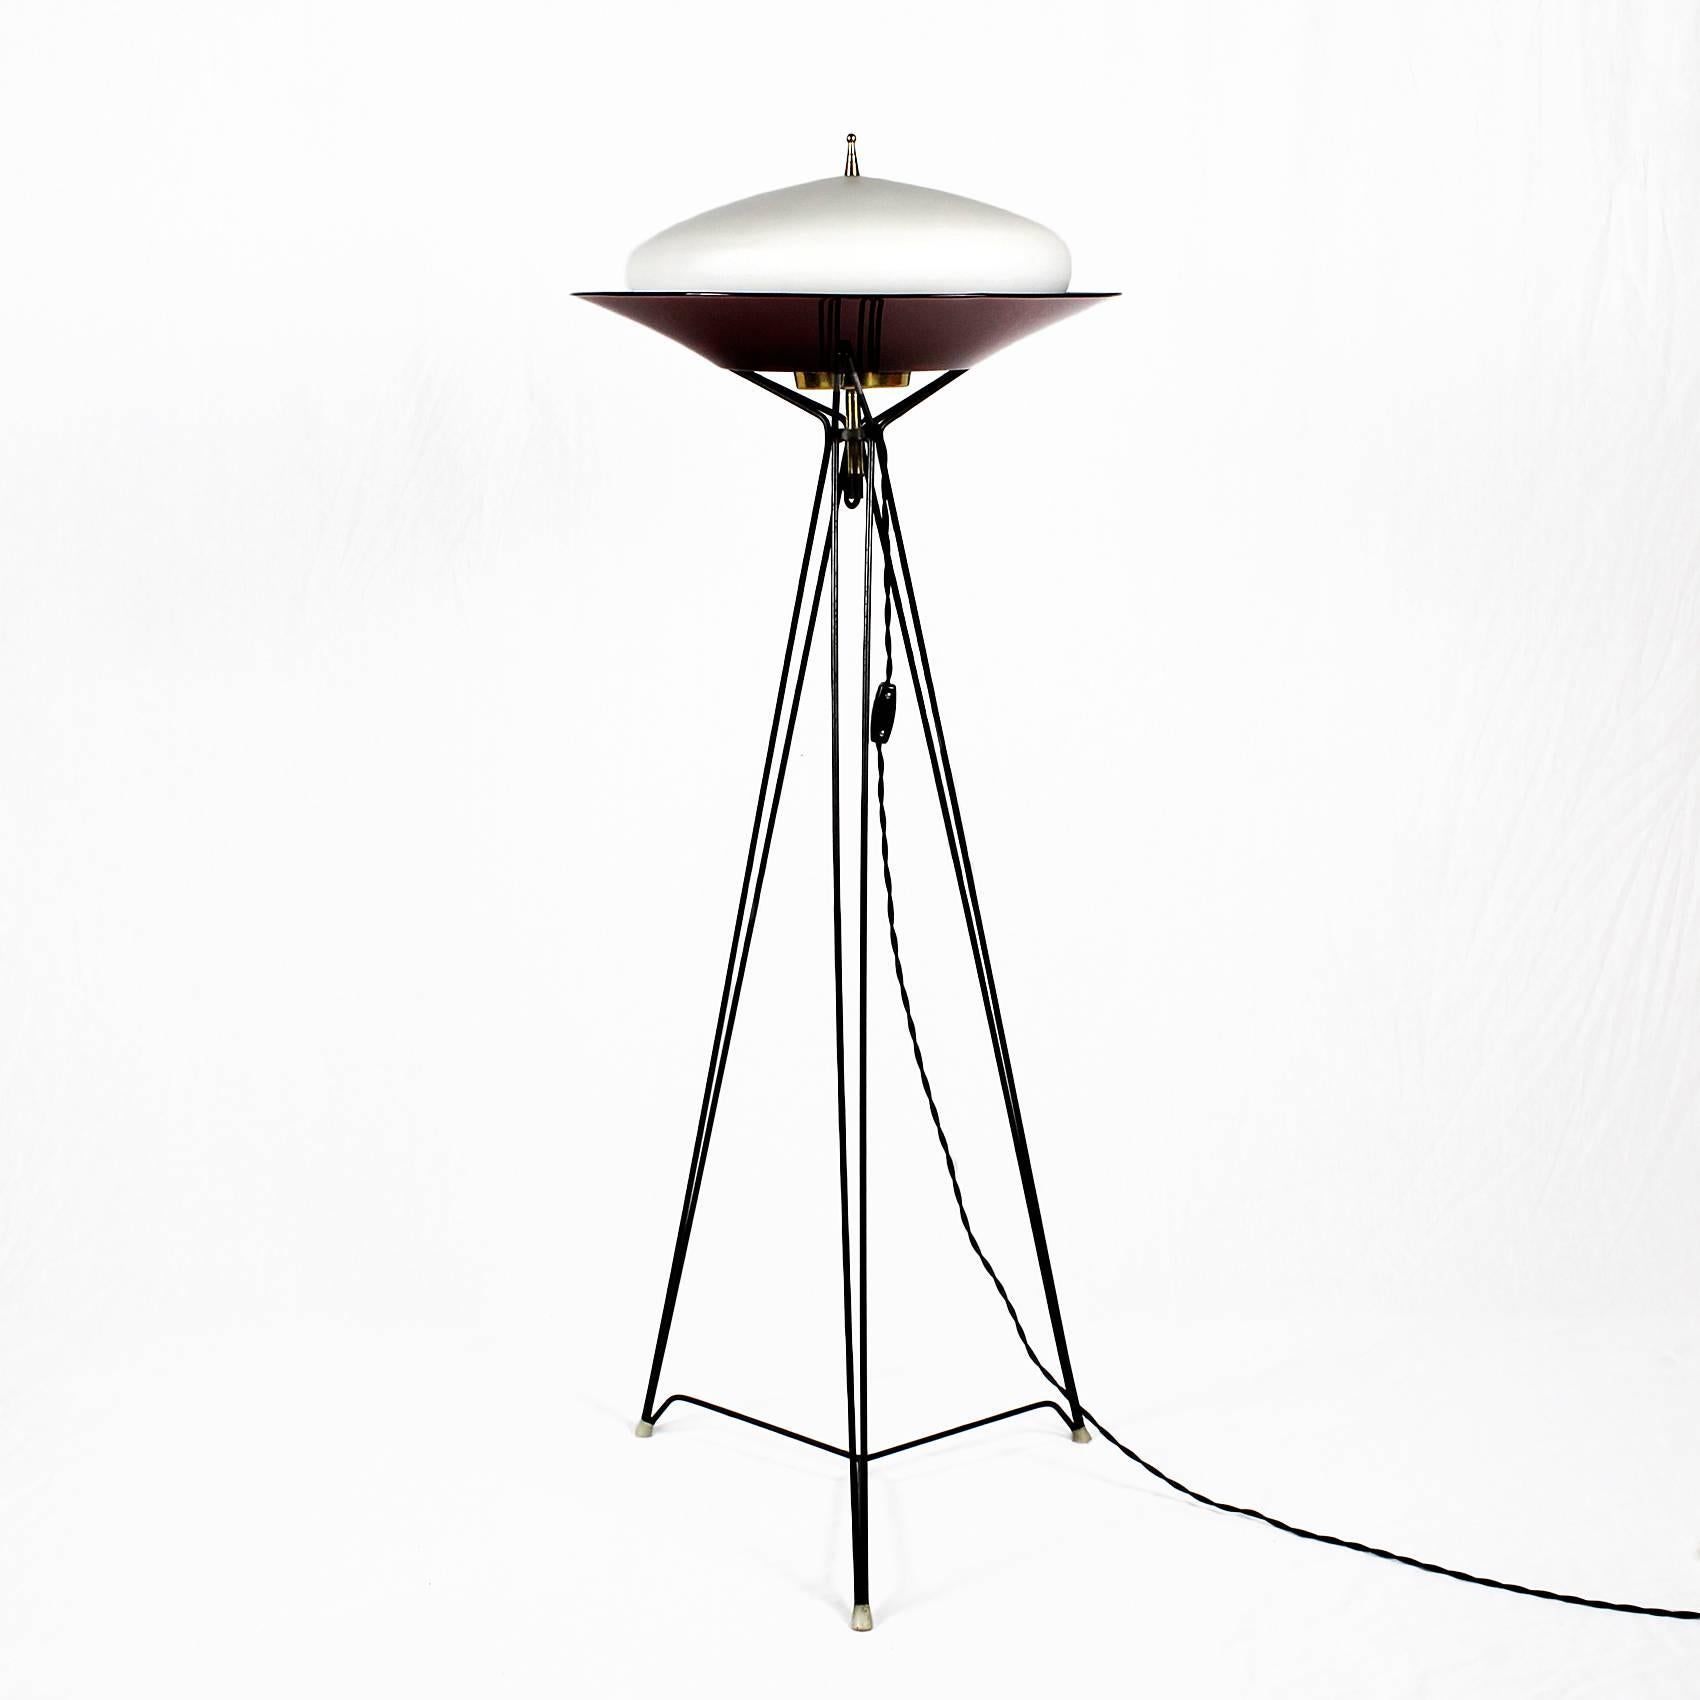 Tripod standing lamp, black lacquered metal, polished brass lightning system, white opaline and red translucent plexiglass.

Italy, circa 1960.